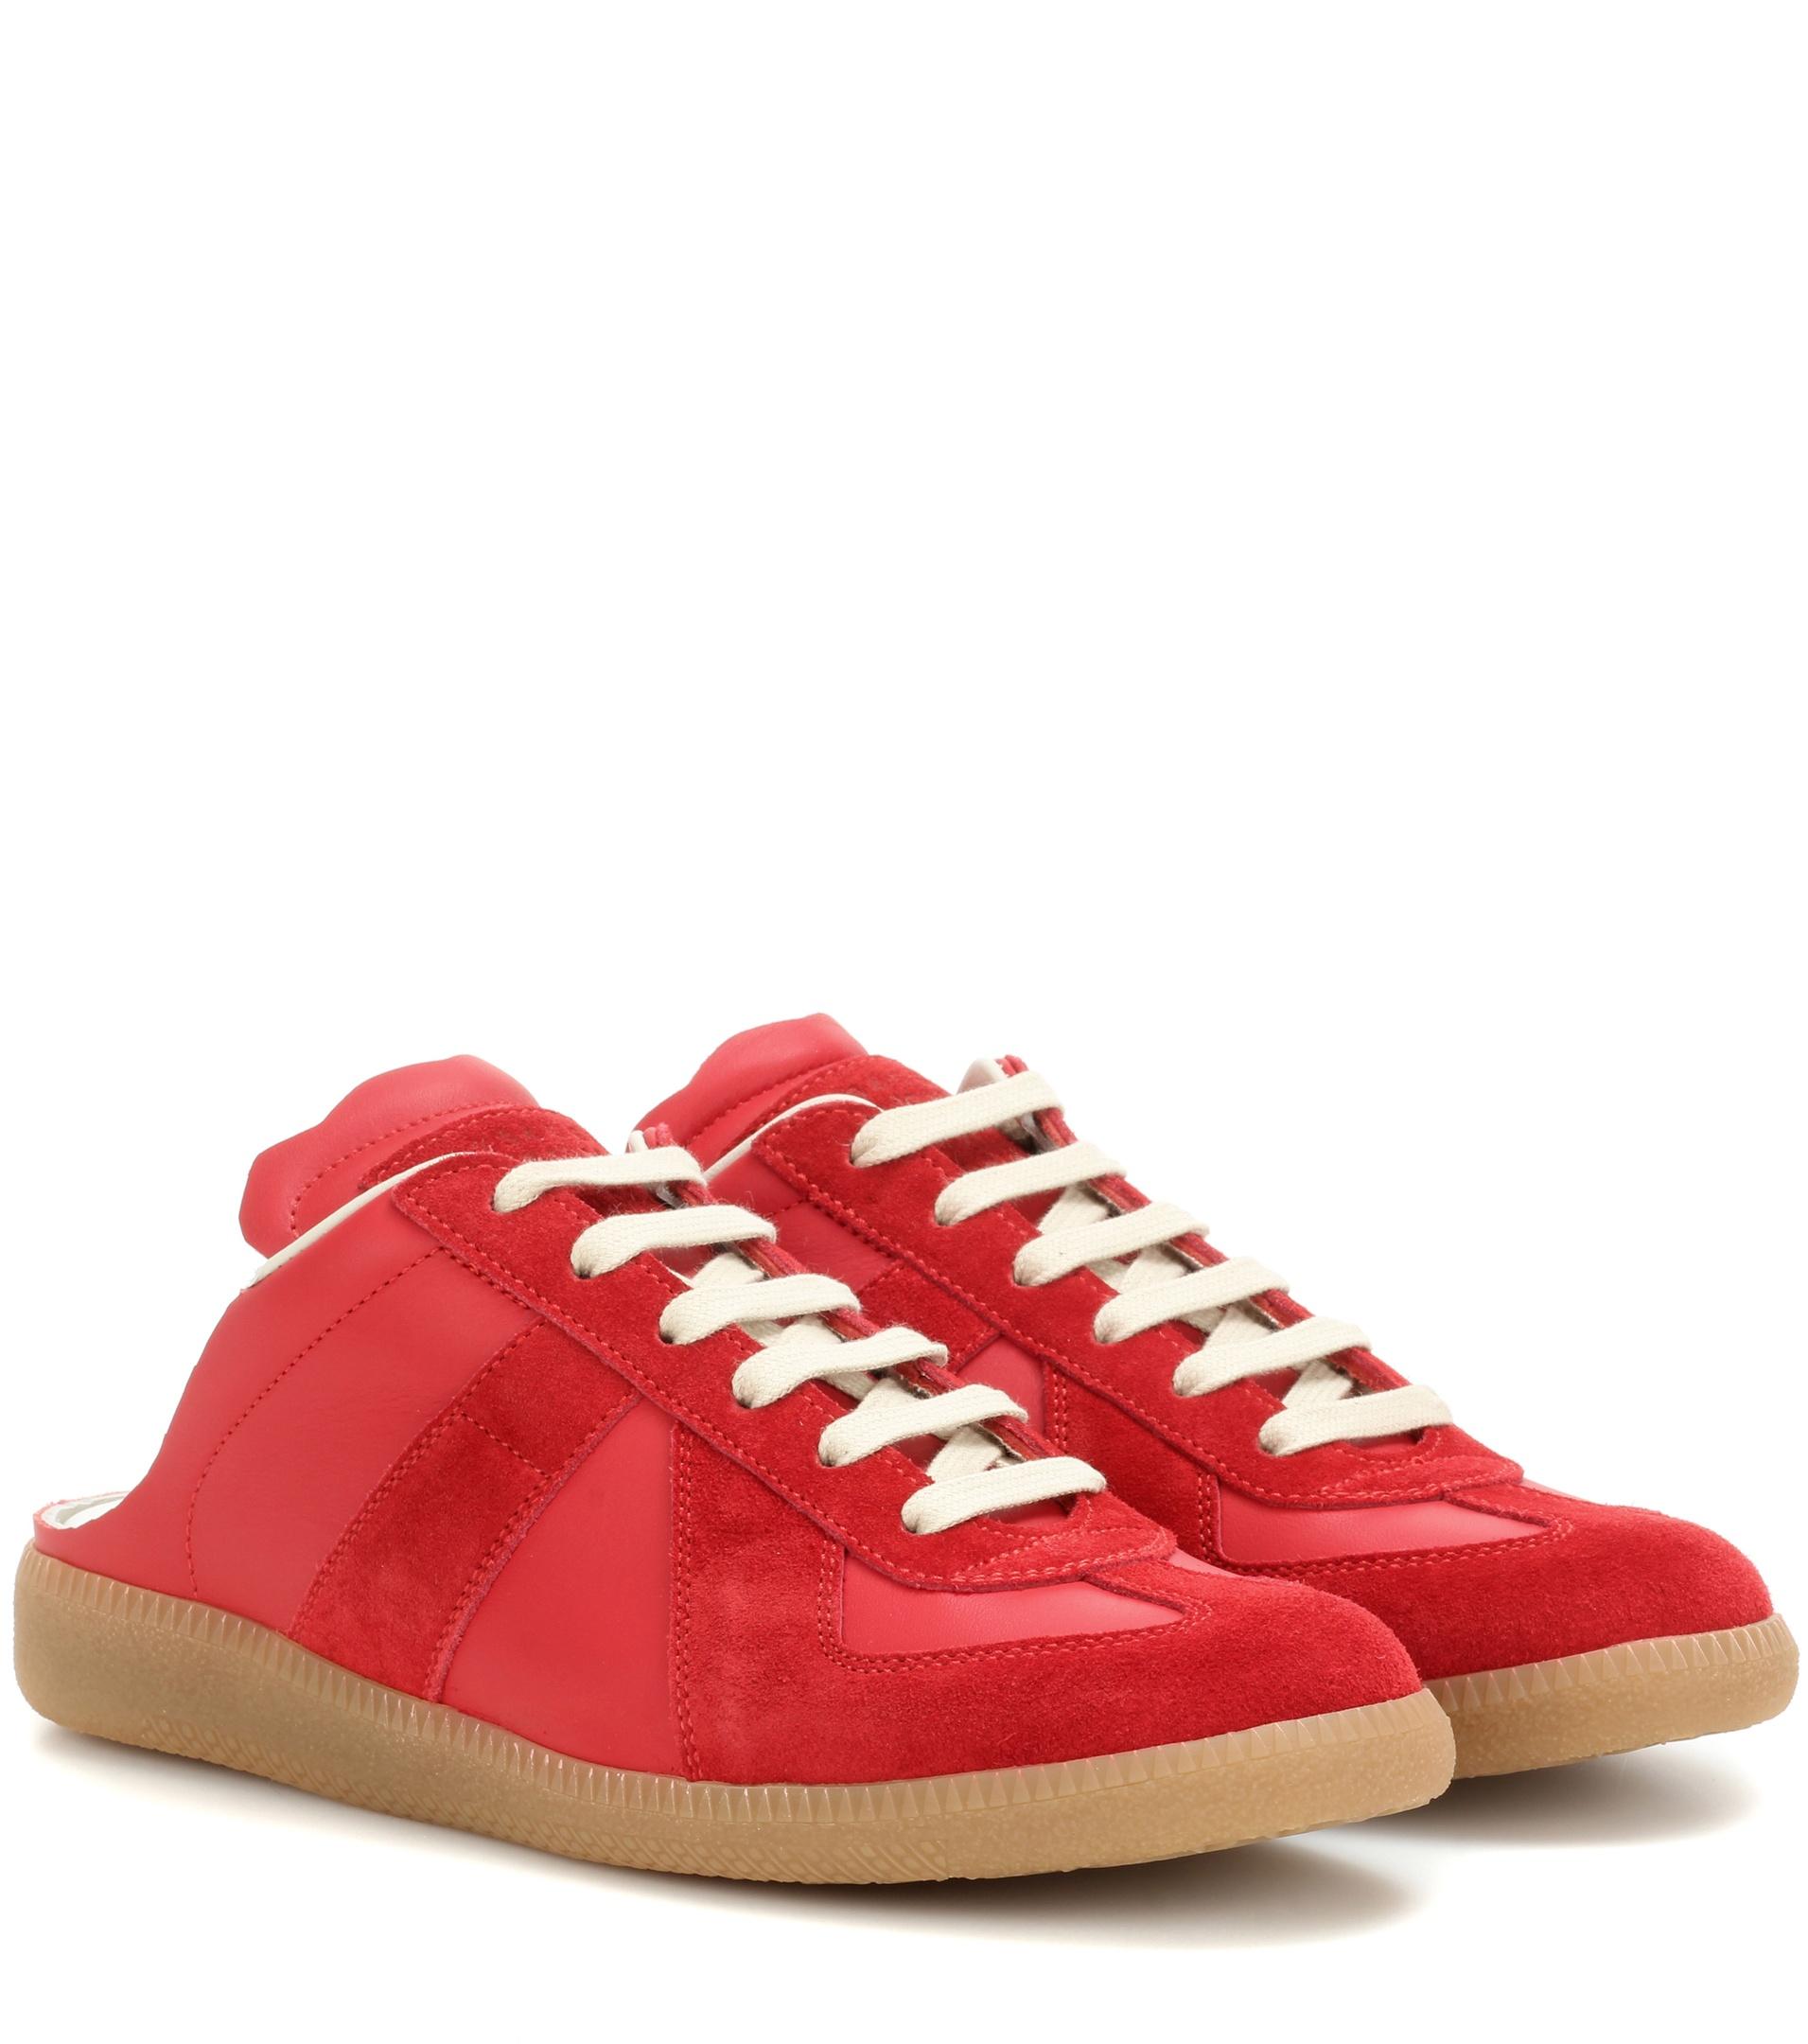 Maison Margiela Backless Leather And Suede Sneakers in Red - Lyst